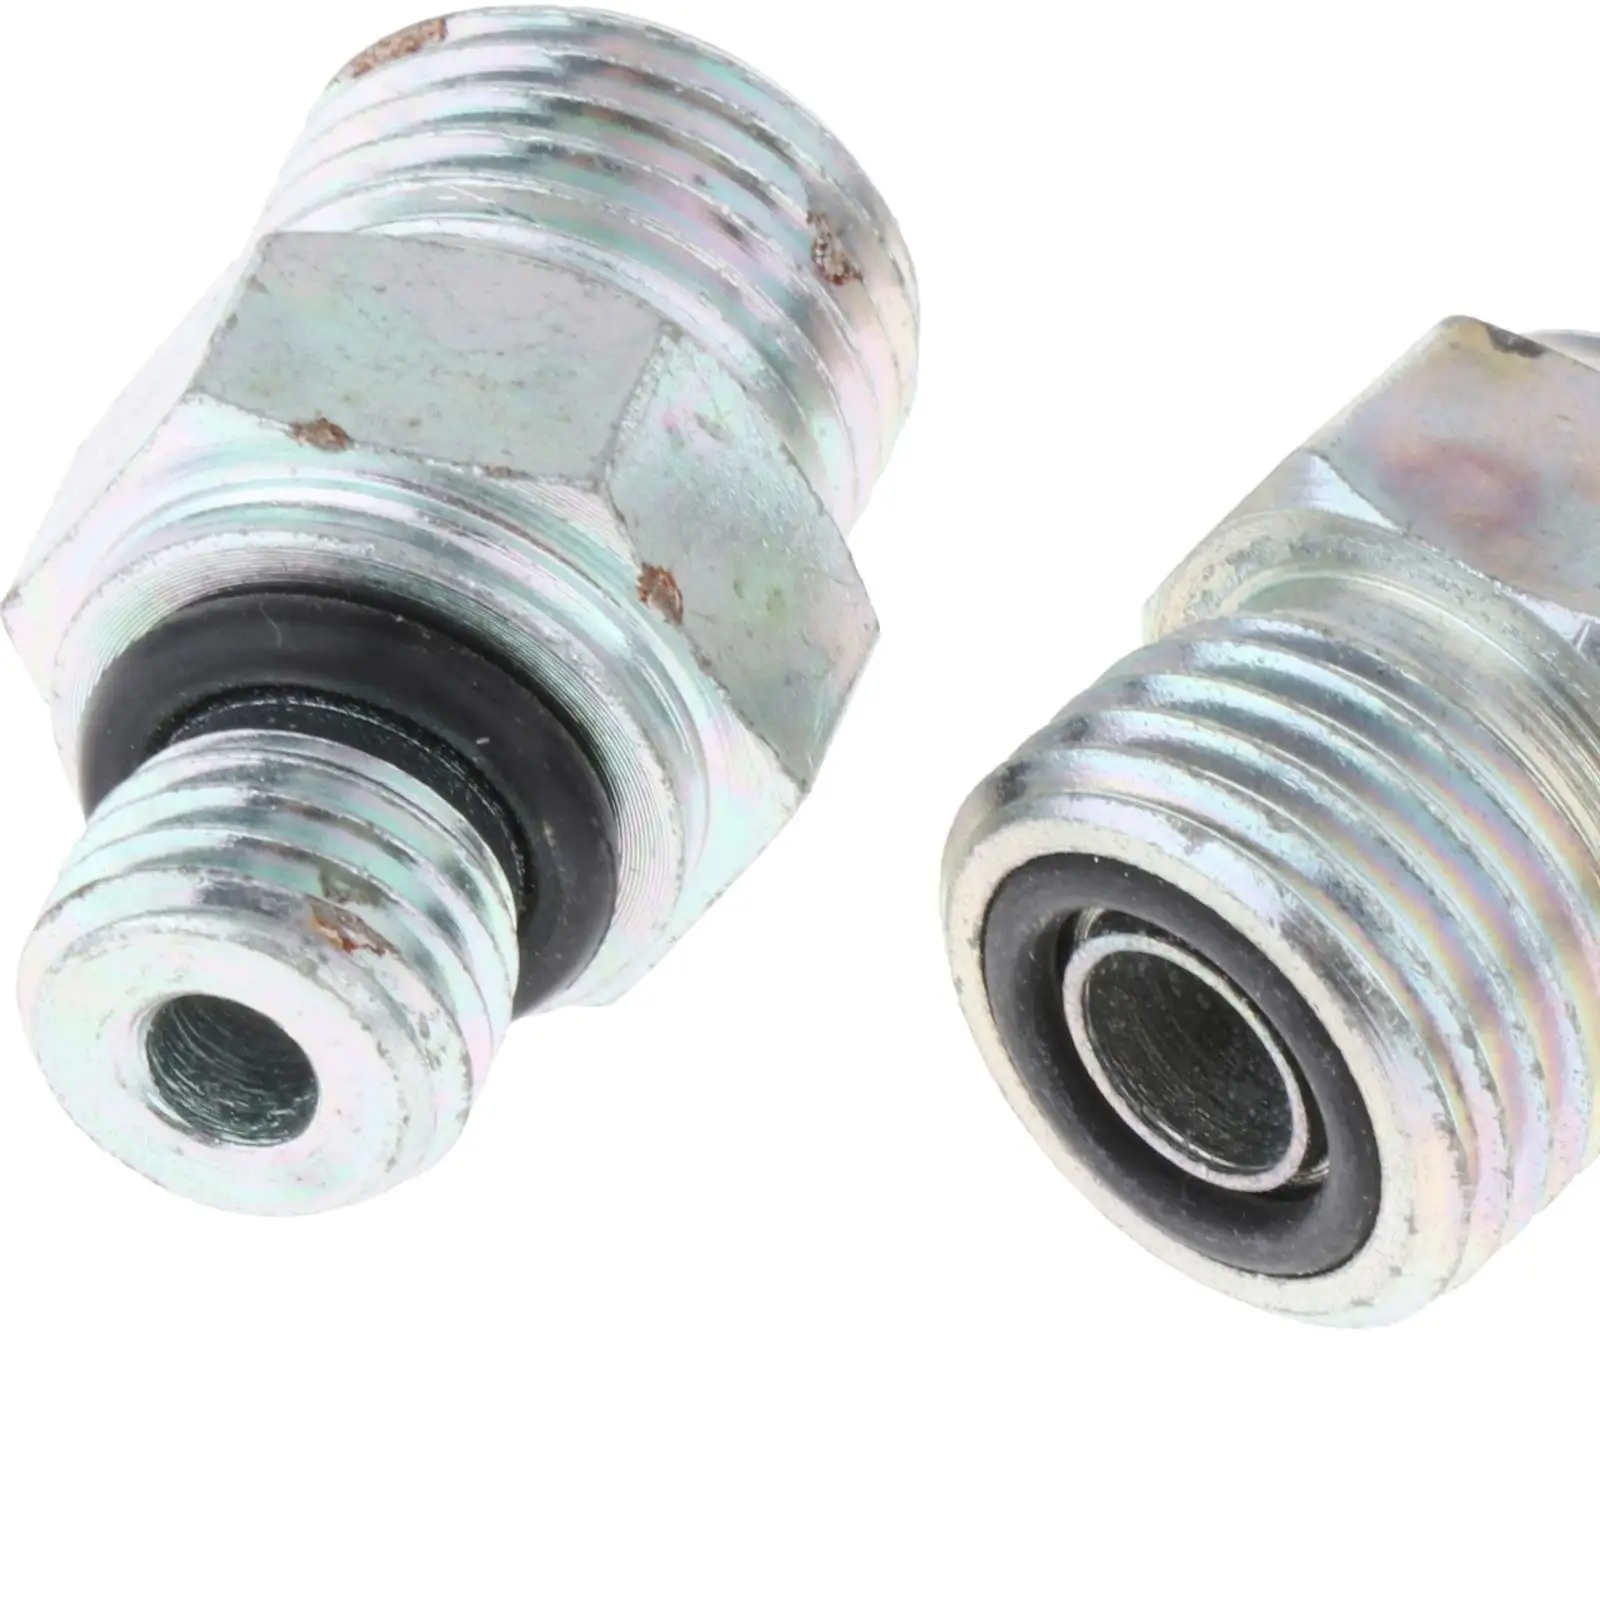 2 Pieces Connectors Joints Accessory Metal Turbo Oil Supply Line Fitting for Vehicle Auto Parts Automotive Car Engine Parts